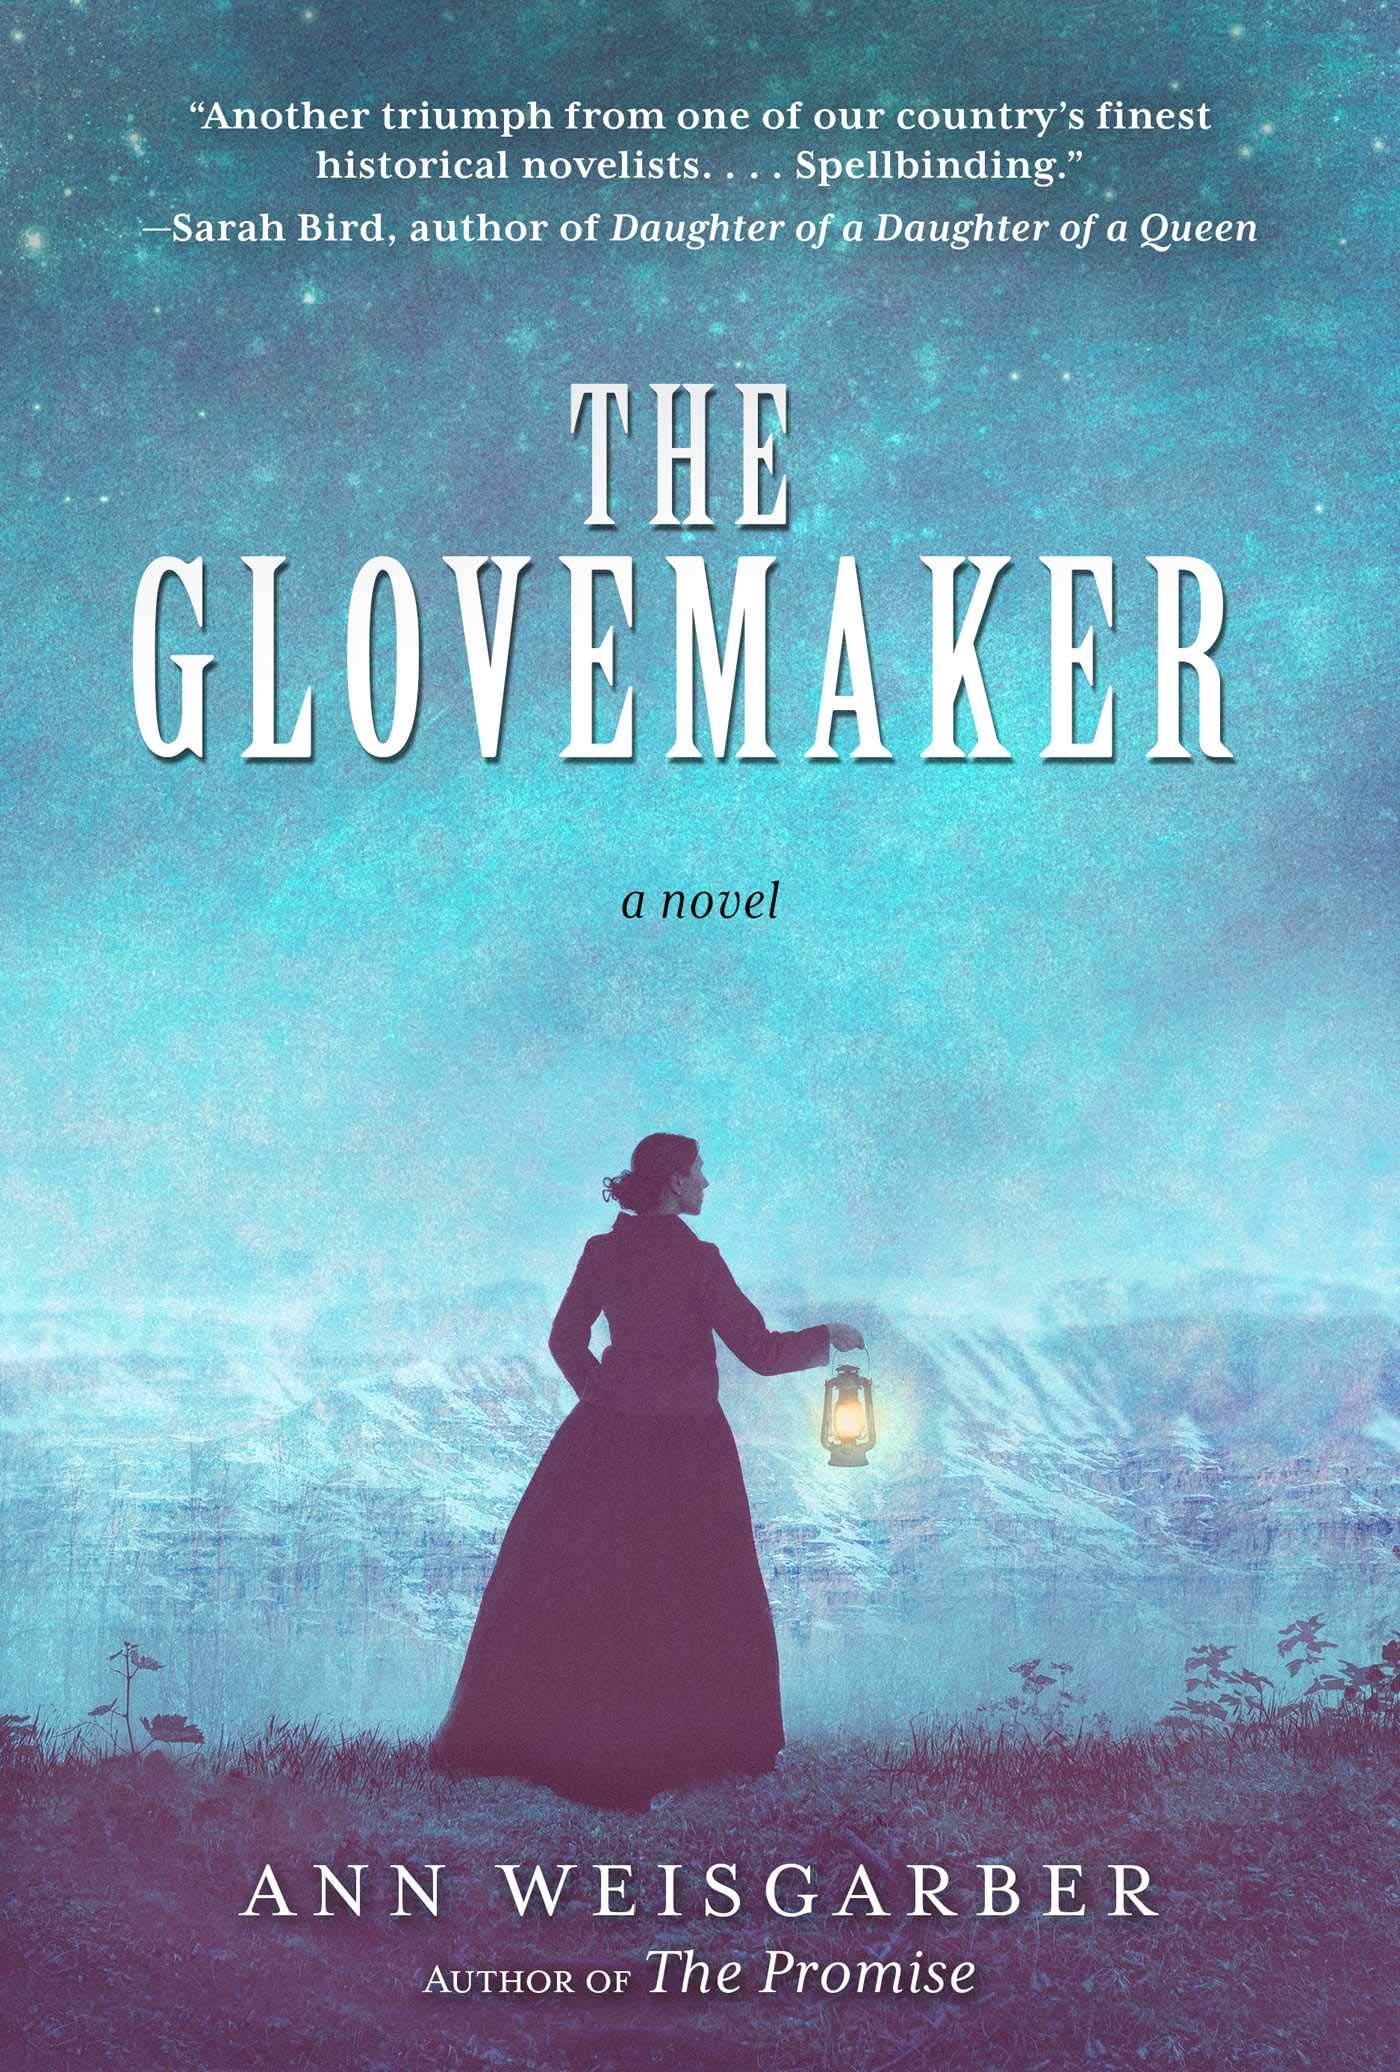 Book cover art: The silhouette of a woman in a long dress, holding a lantern.  She is standing on dark blue ground, and the sky is a gloomy, dark blue. The title, The Glovemaker, appears towards the top.  The author's name, Ann Weisgarber, appears at the bottom.